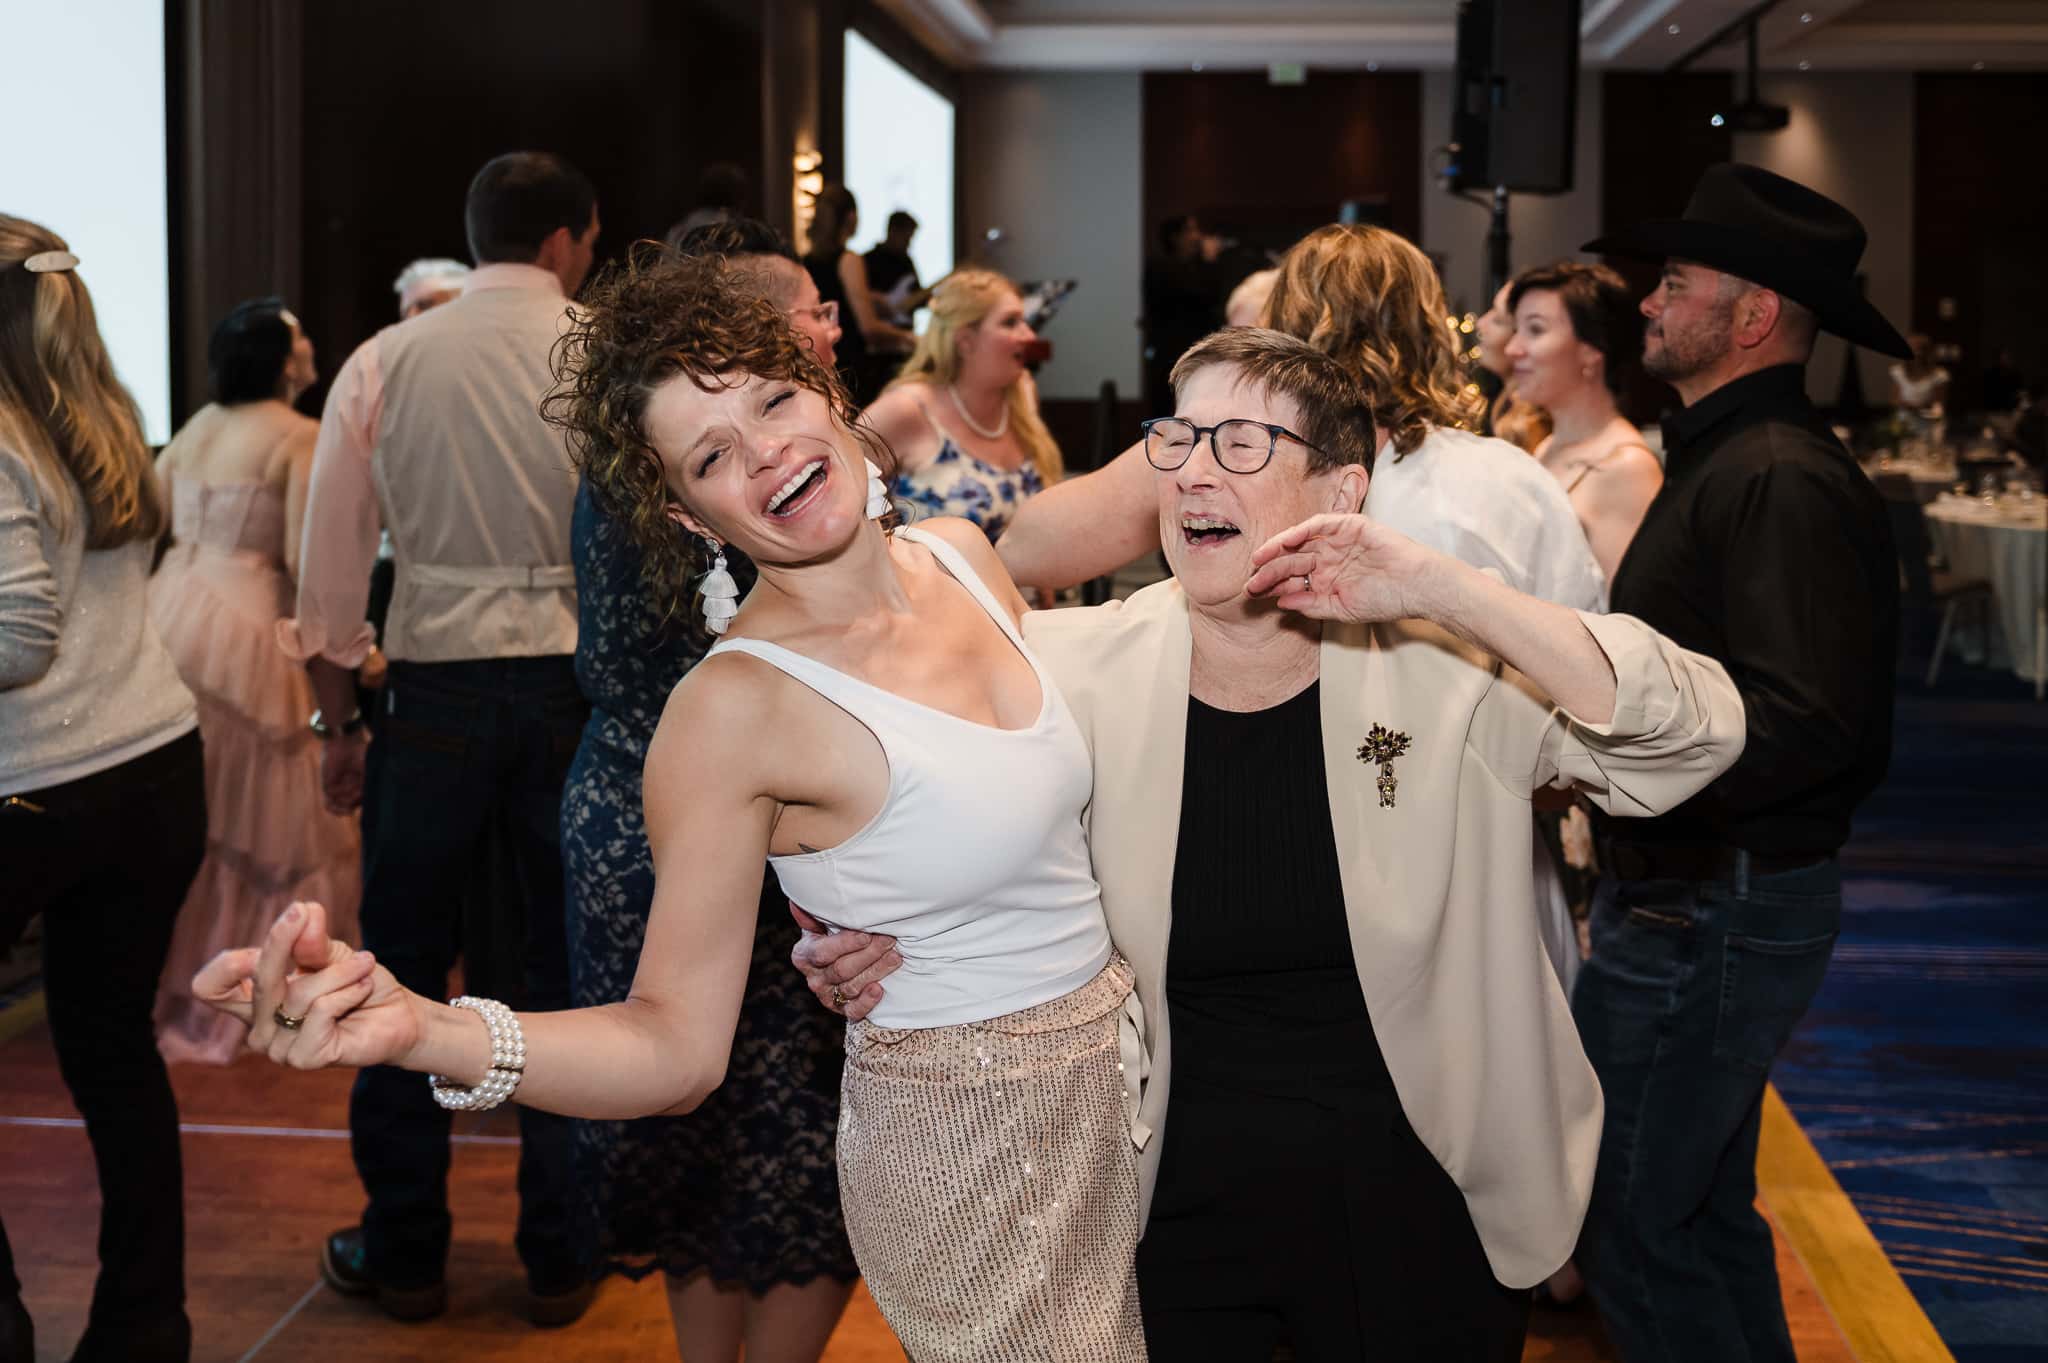 Two women dance together at the Love for Lily event.